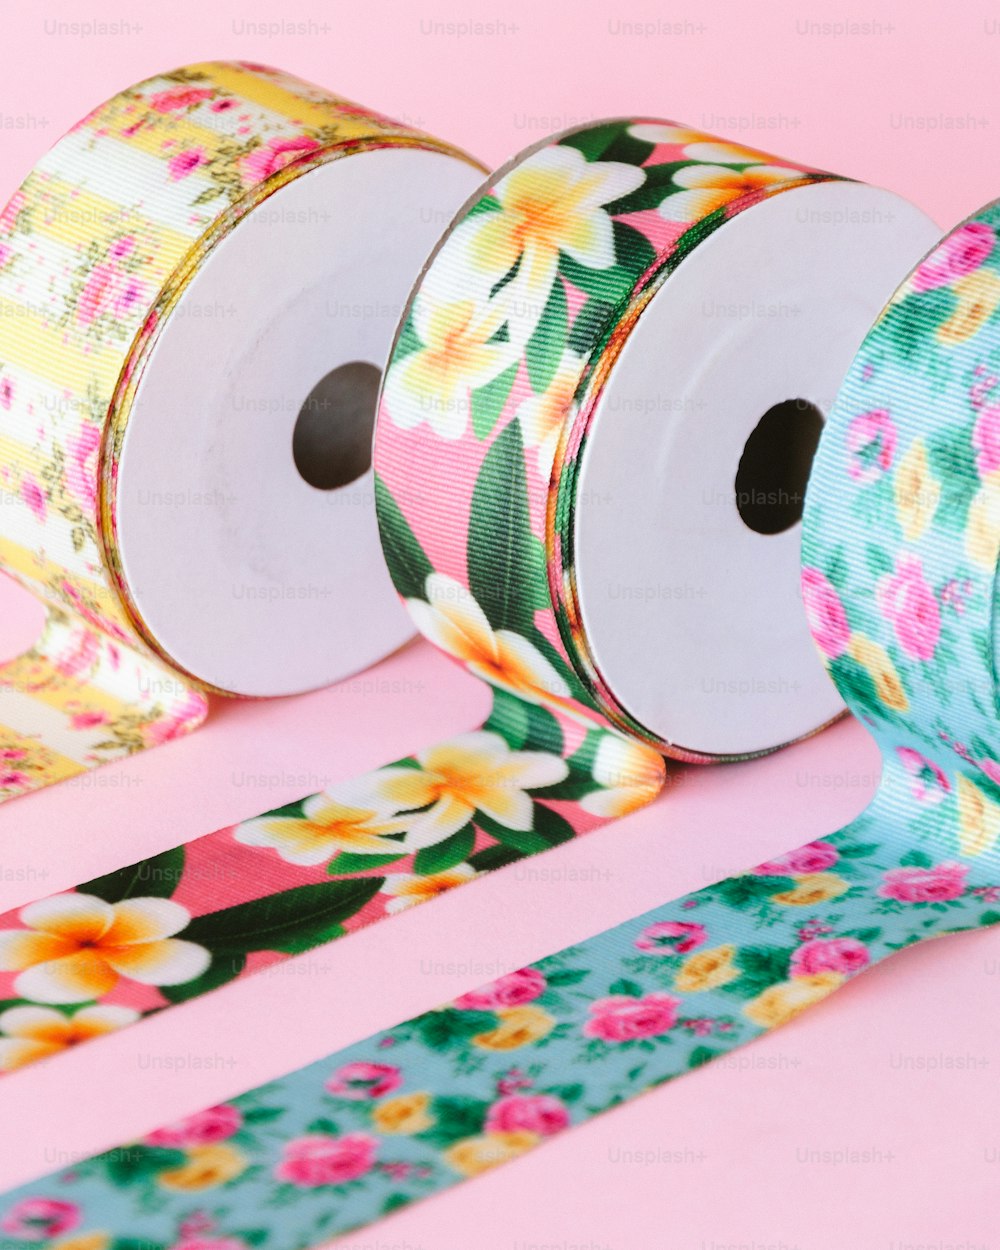 three rolls of floral washi tape on a pink background